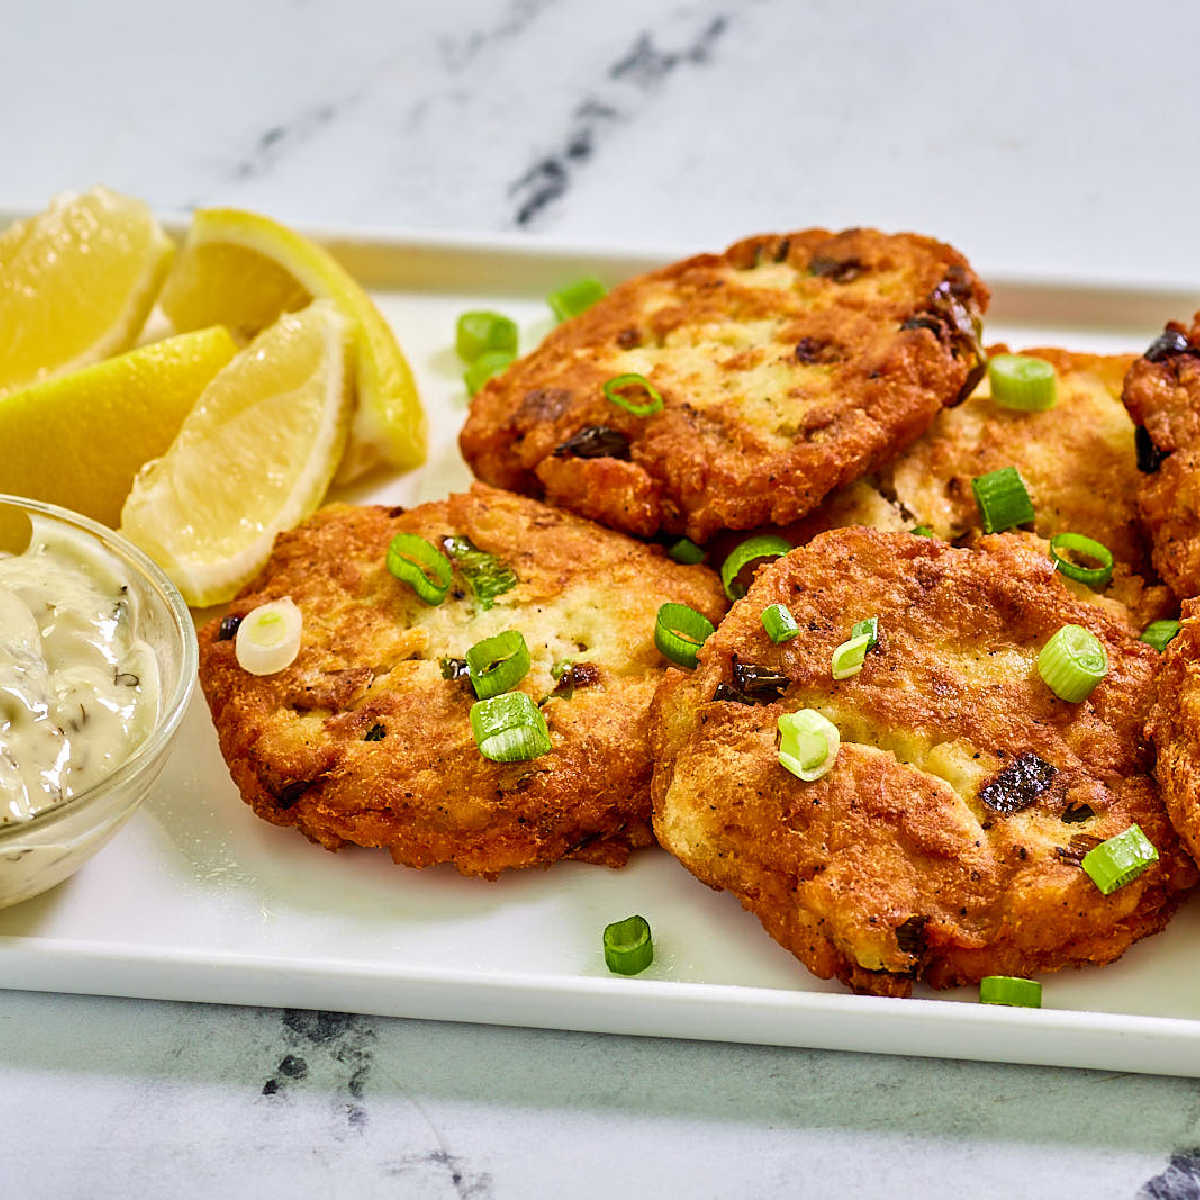 Golden salmon potato cakes topped with green onion and served on a plate with lemon wedges and tartar sauce.